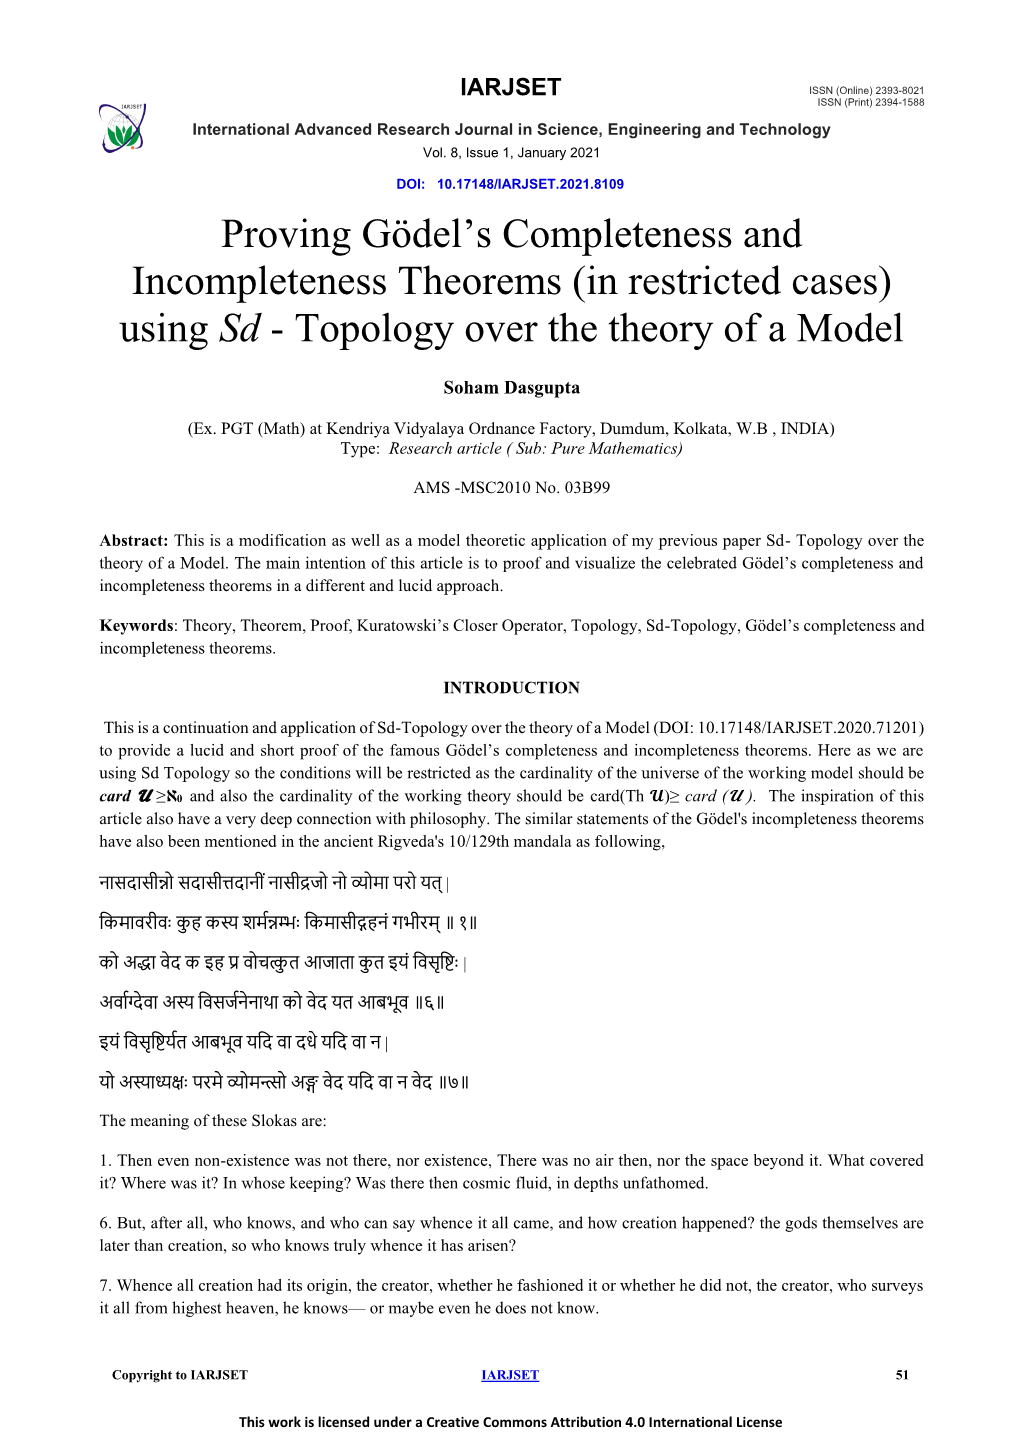 Proving Gödel's Completeness and Incompleteness Theorems